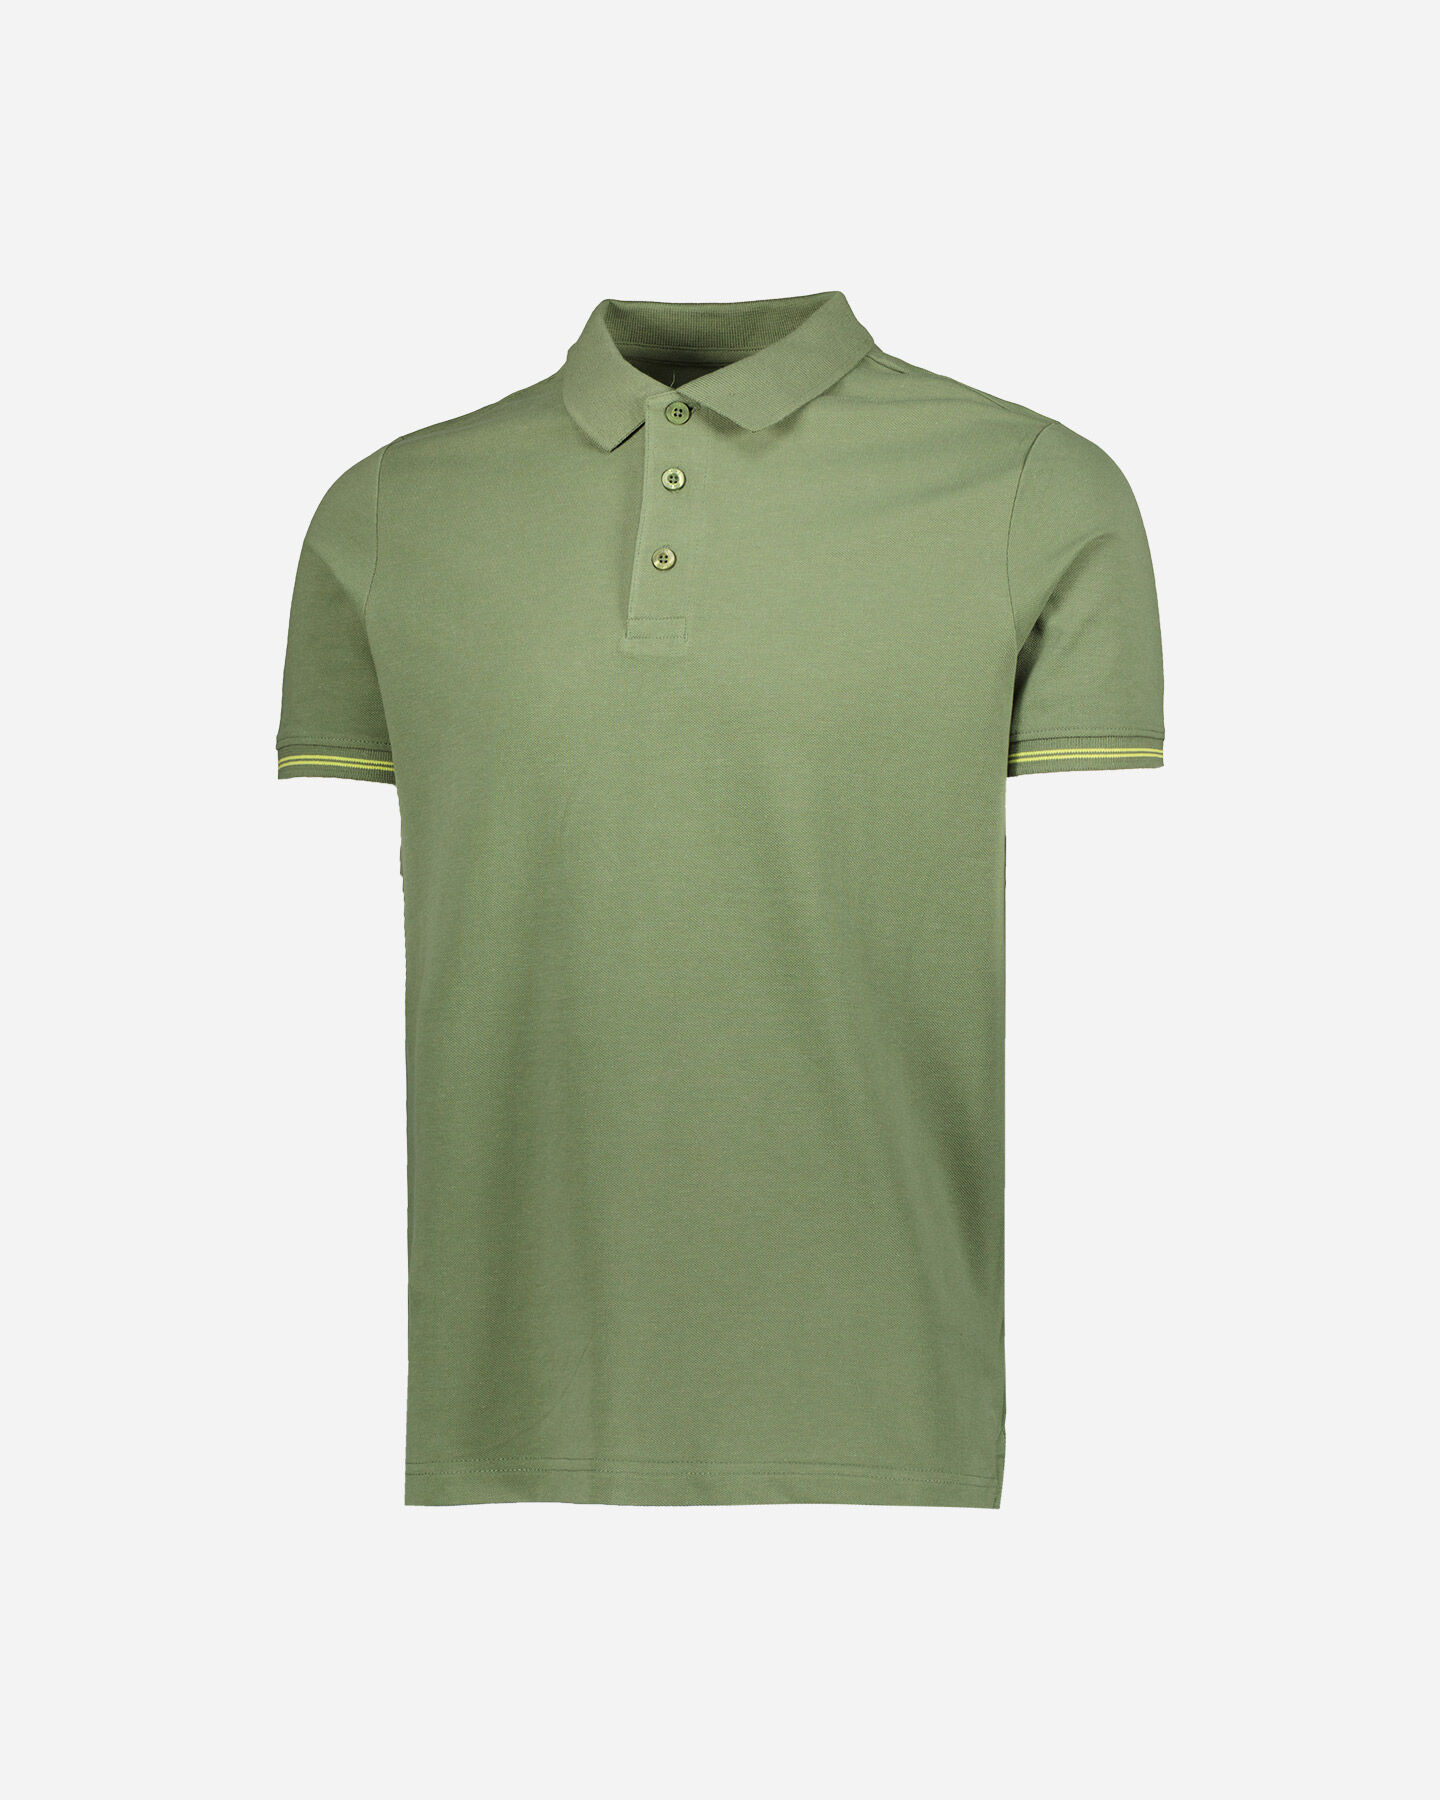  Polo DACK'S BASIC COLLECTION M S4118370|838|L scatto 5